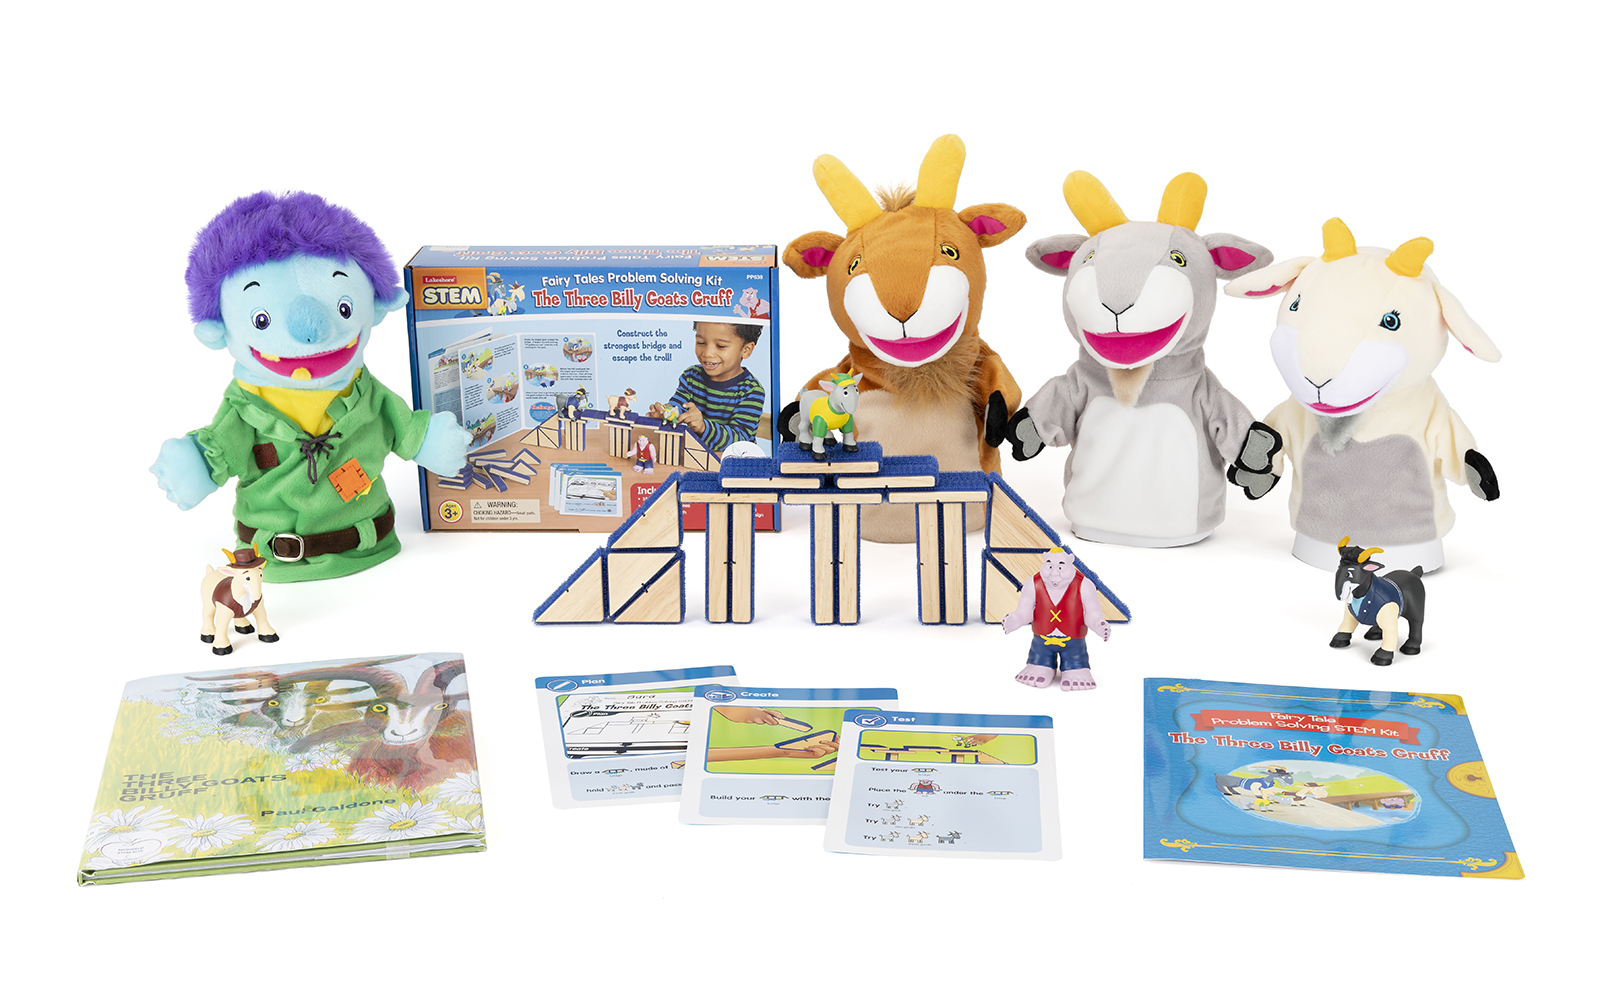 Contents of the Three Billy Goats Gruff Early Literacy Kit